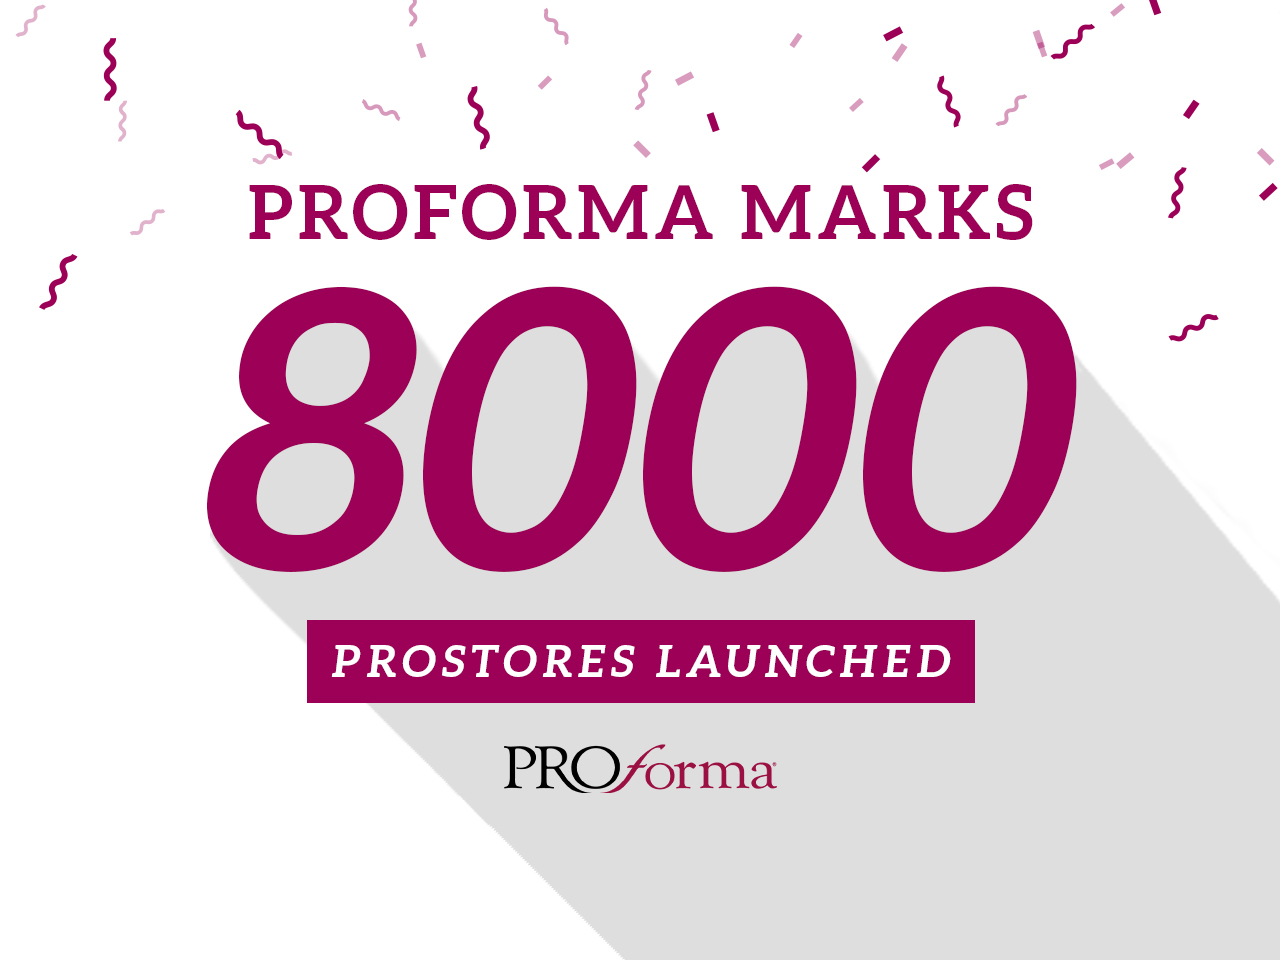 Proforma Marks 8000 ProStores Launched